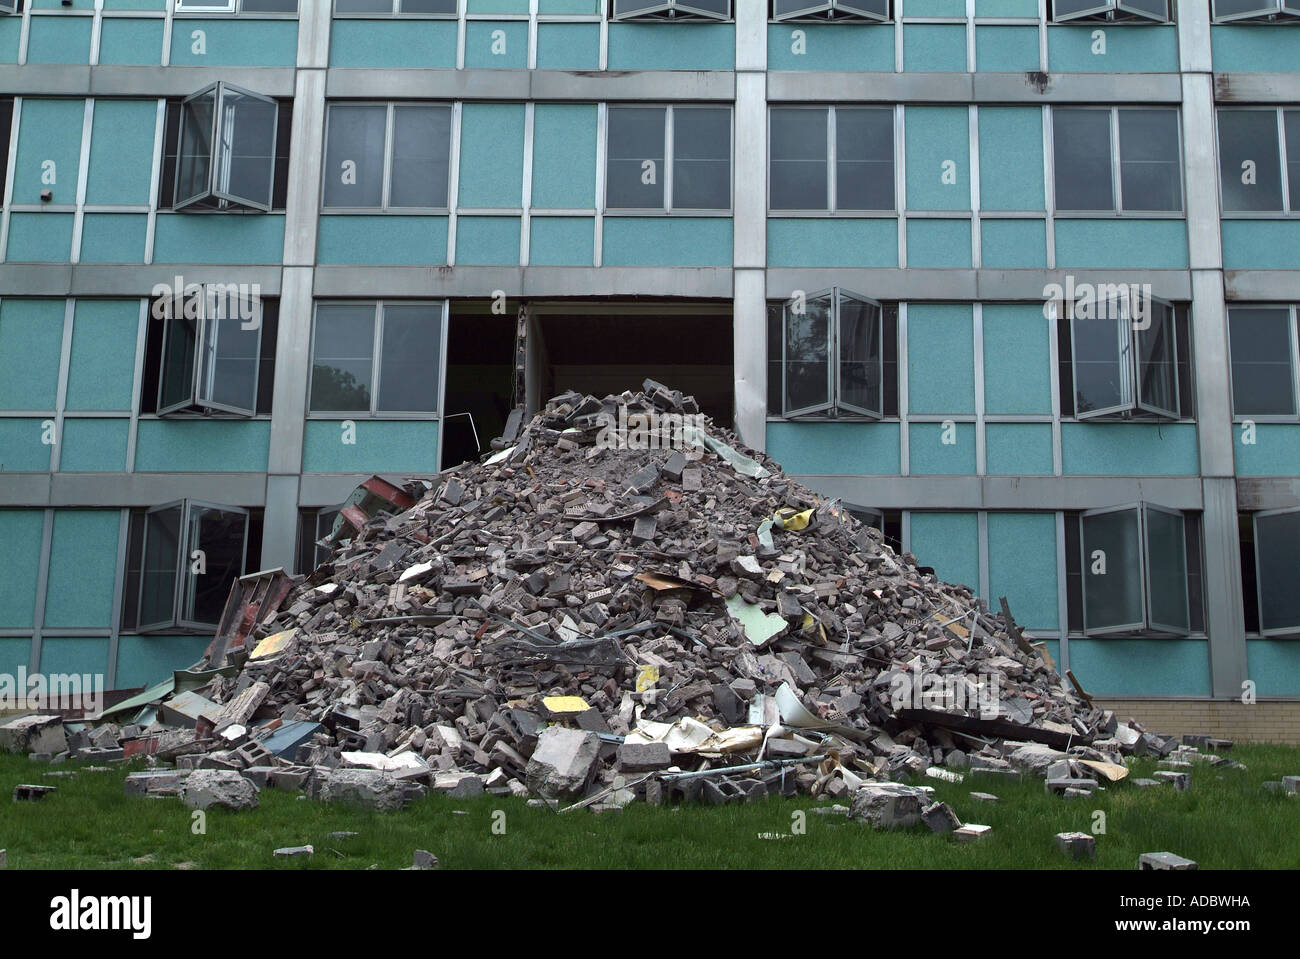 Pile of Debris under a building window as building is being renovated Stock Photo